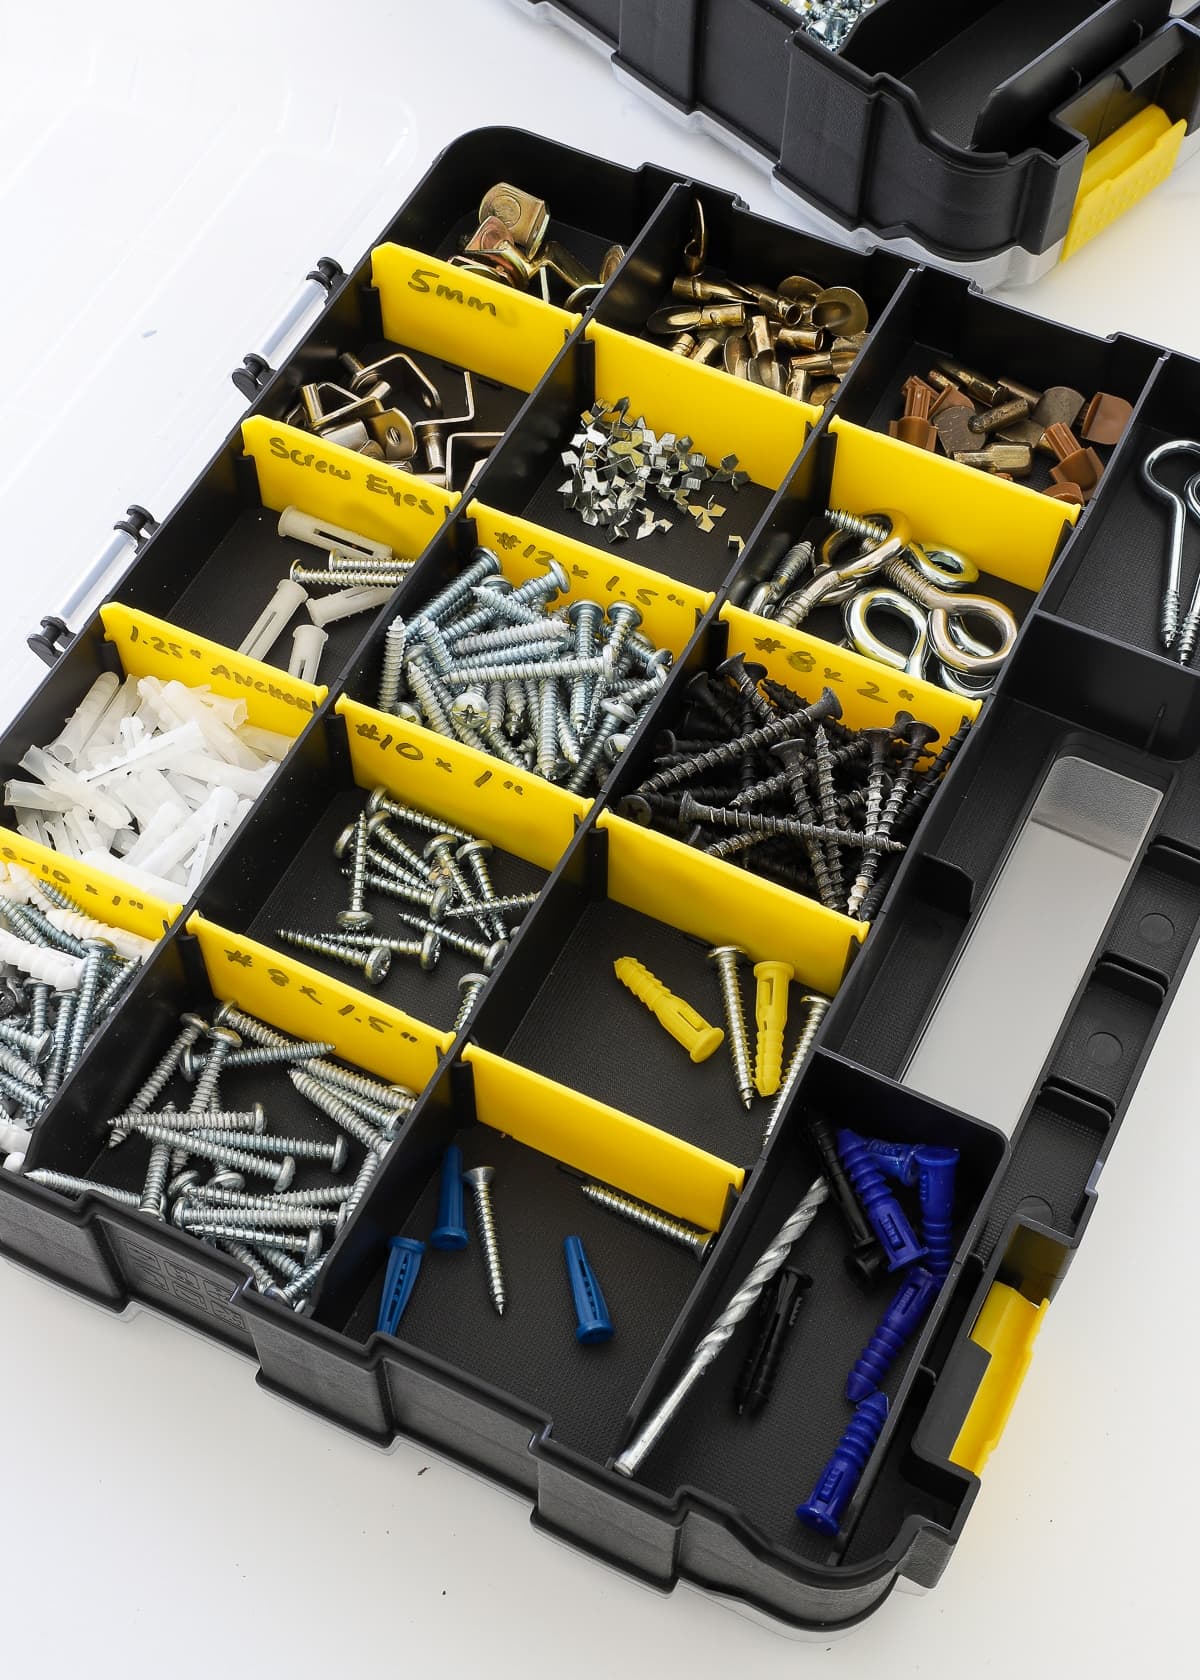 Need help organizing (lots of) screws, nails and other fasteners : r/Tools